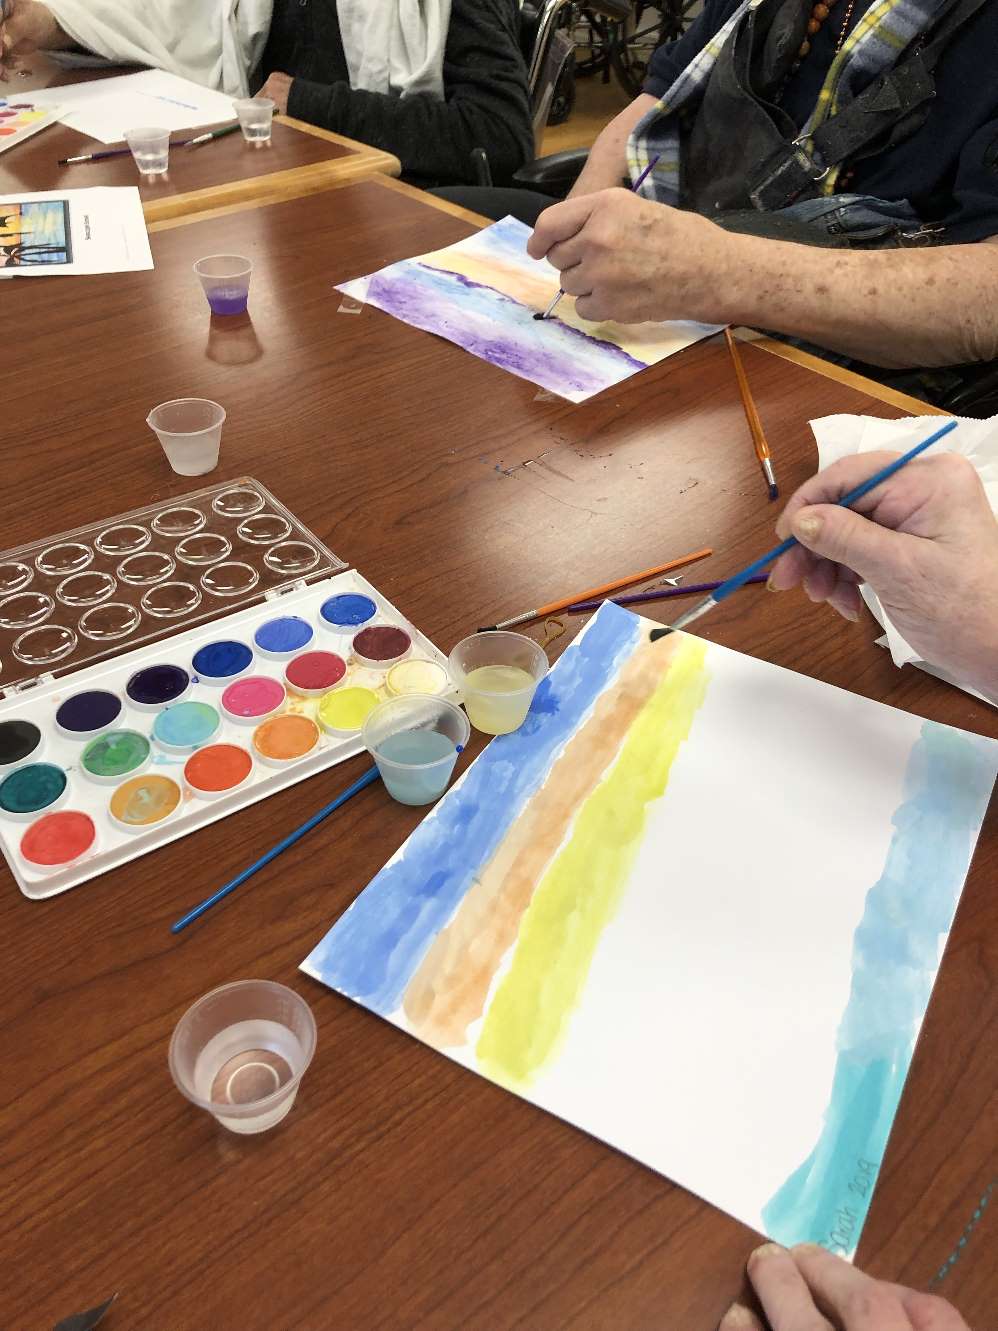 Ross residents completed such beautiful watercolor paintings